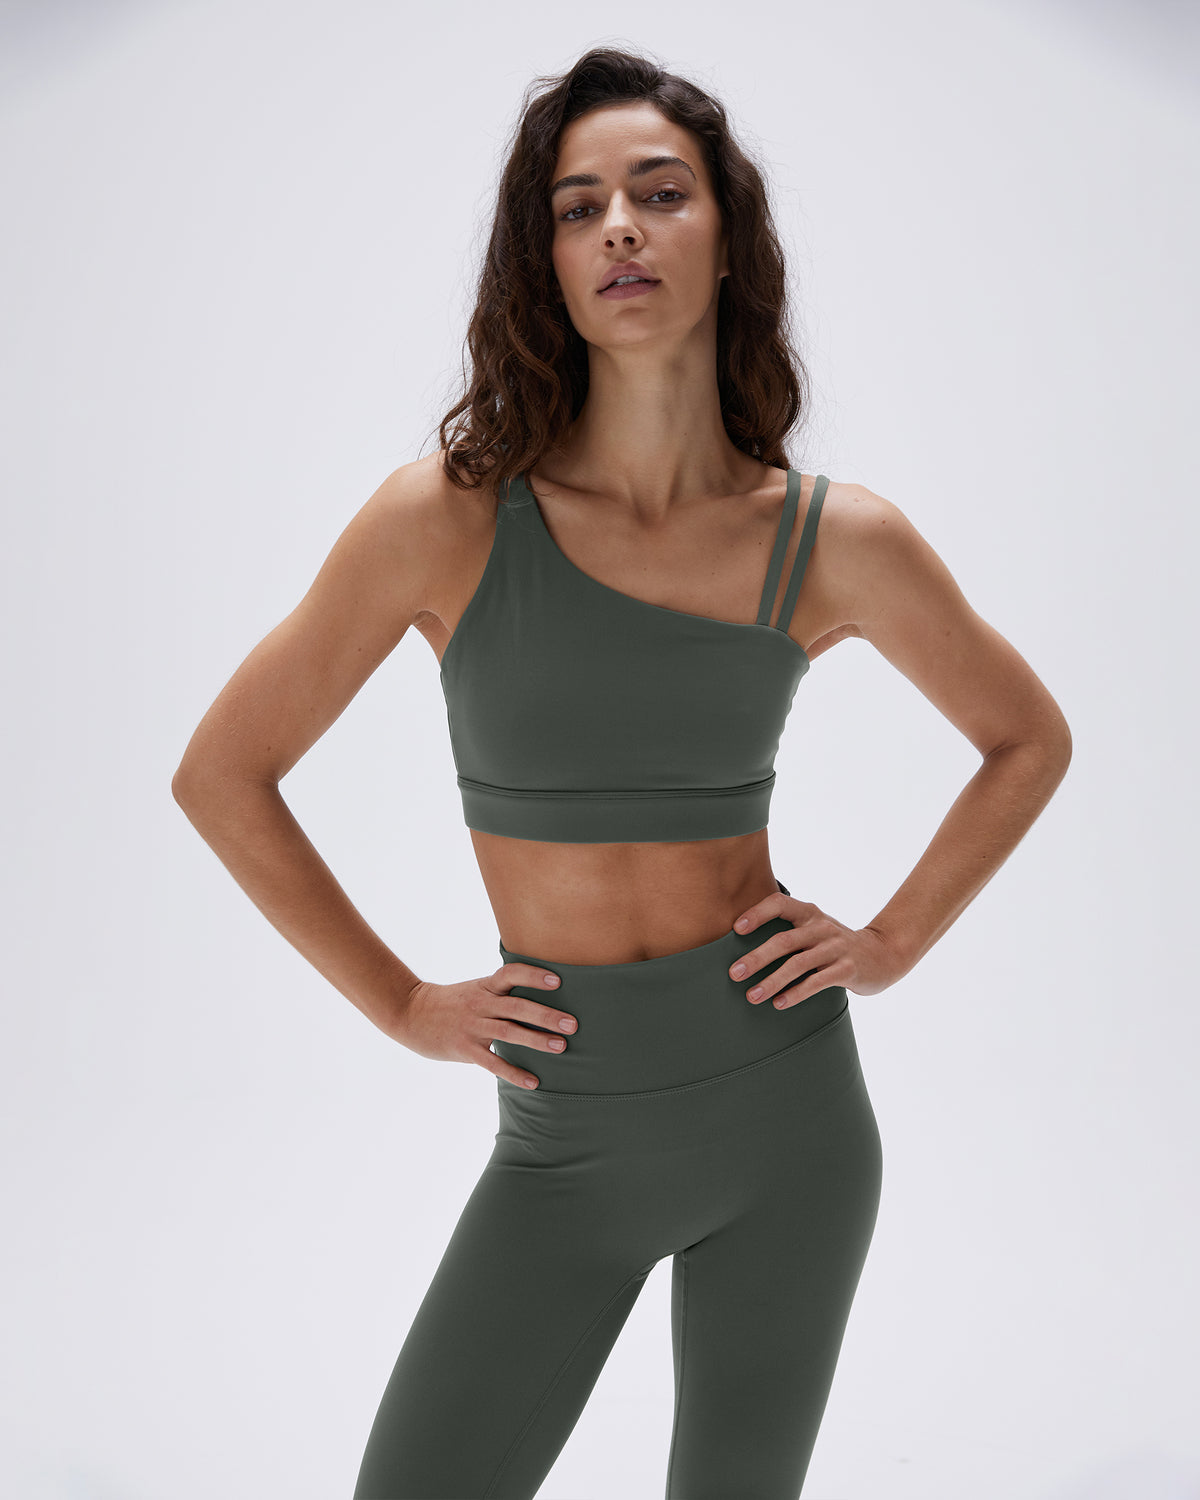 REVERSIBLE BRA TOP, A Bralette, Reverses From Gold Foil to Celadon Wool,  Transforming, Adjustable -  Canada